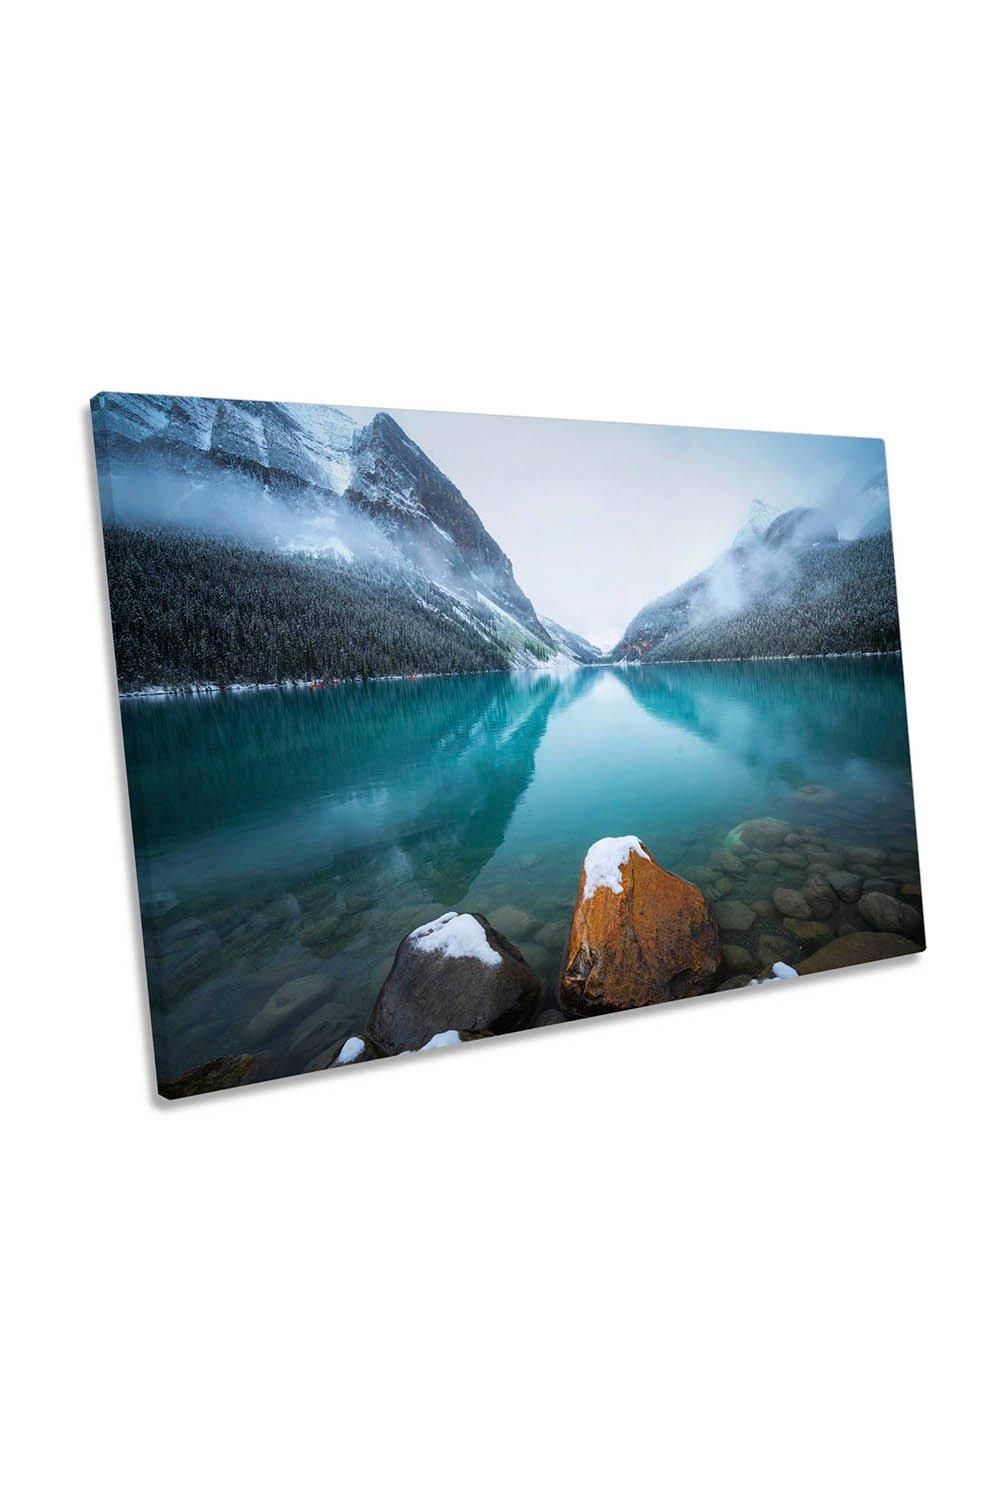 Foggy Lake Louise Canada Rockies Landscape Canvas Wall Art Picture Print